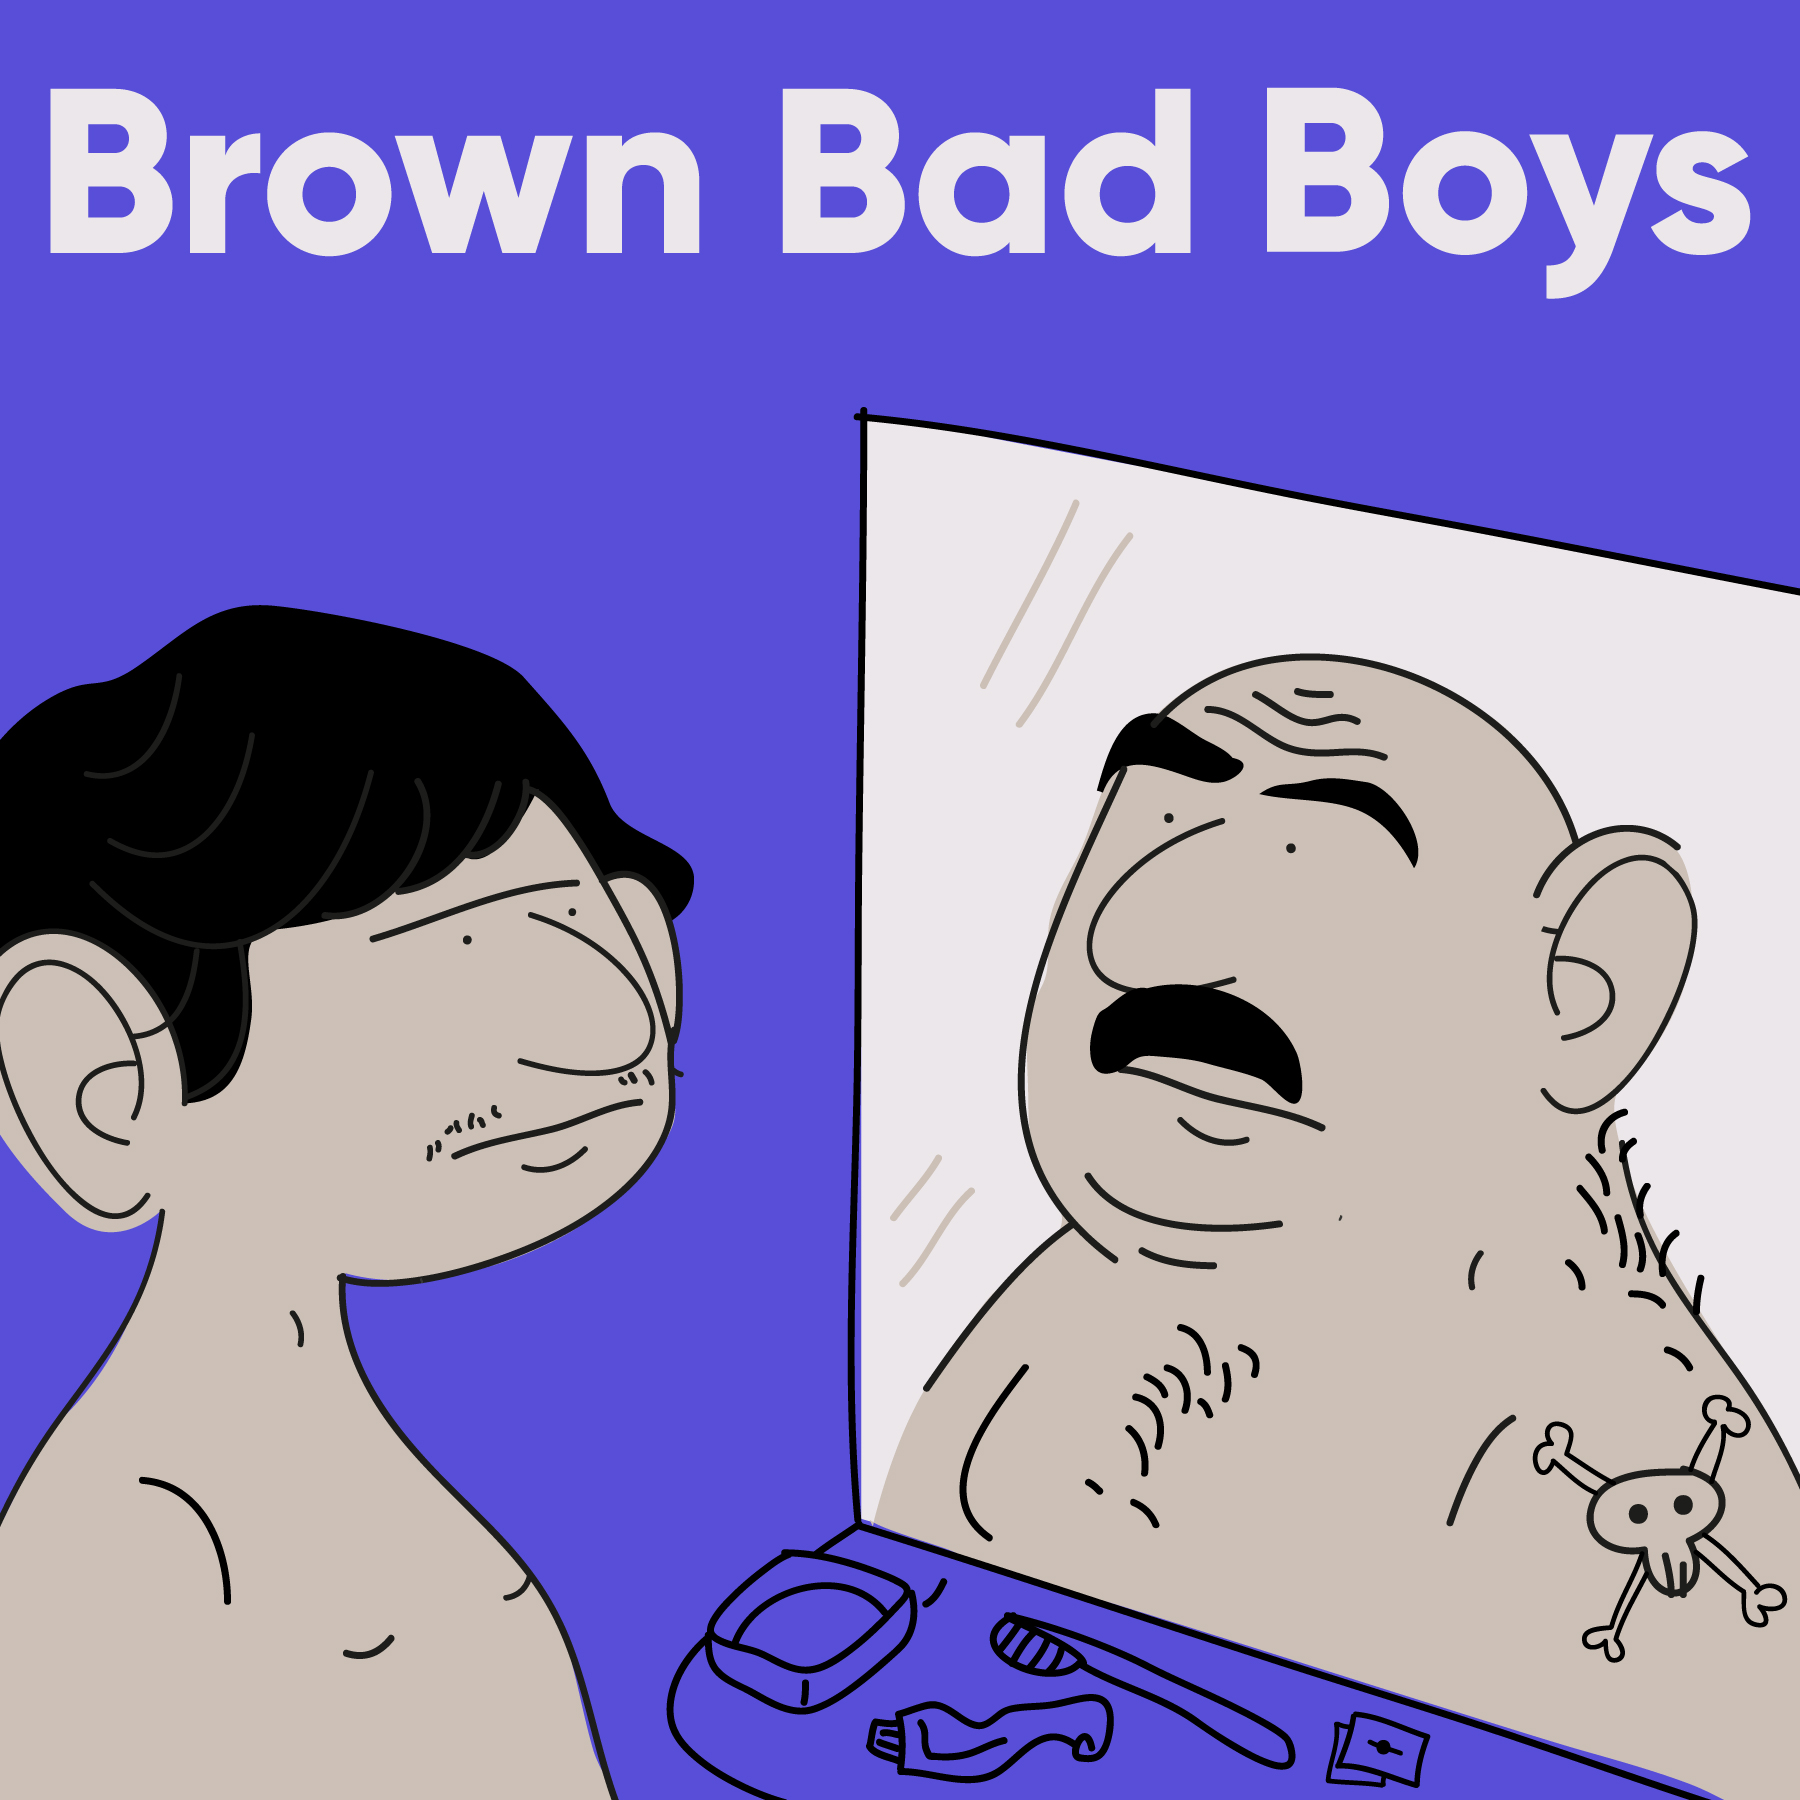 Ep Swap: Brown Bad Boys from Other Men Need Help